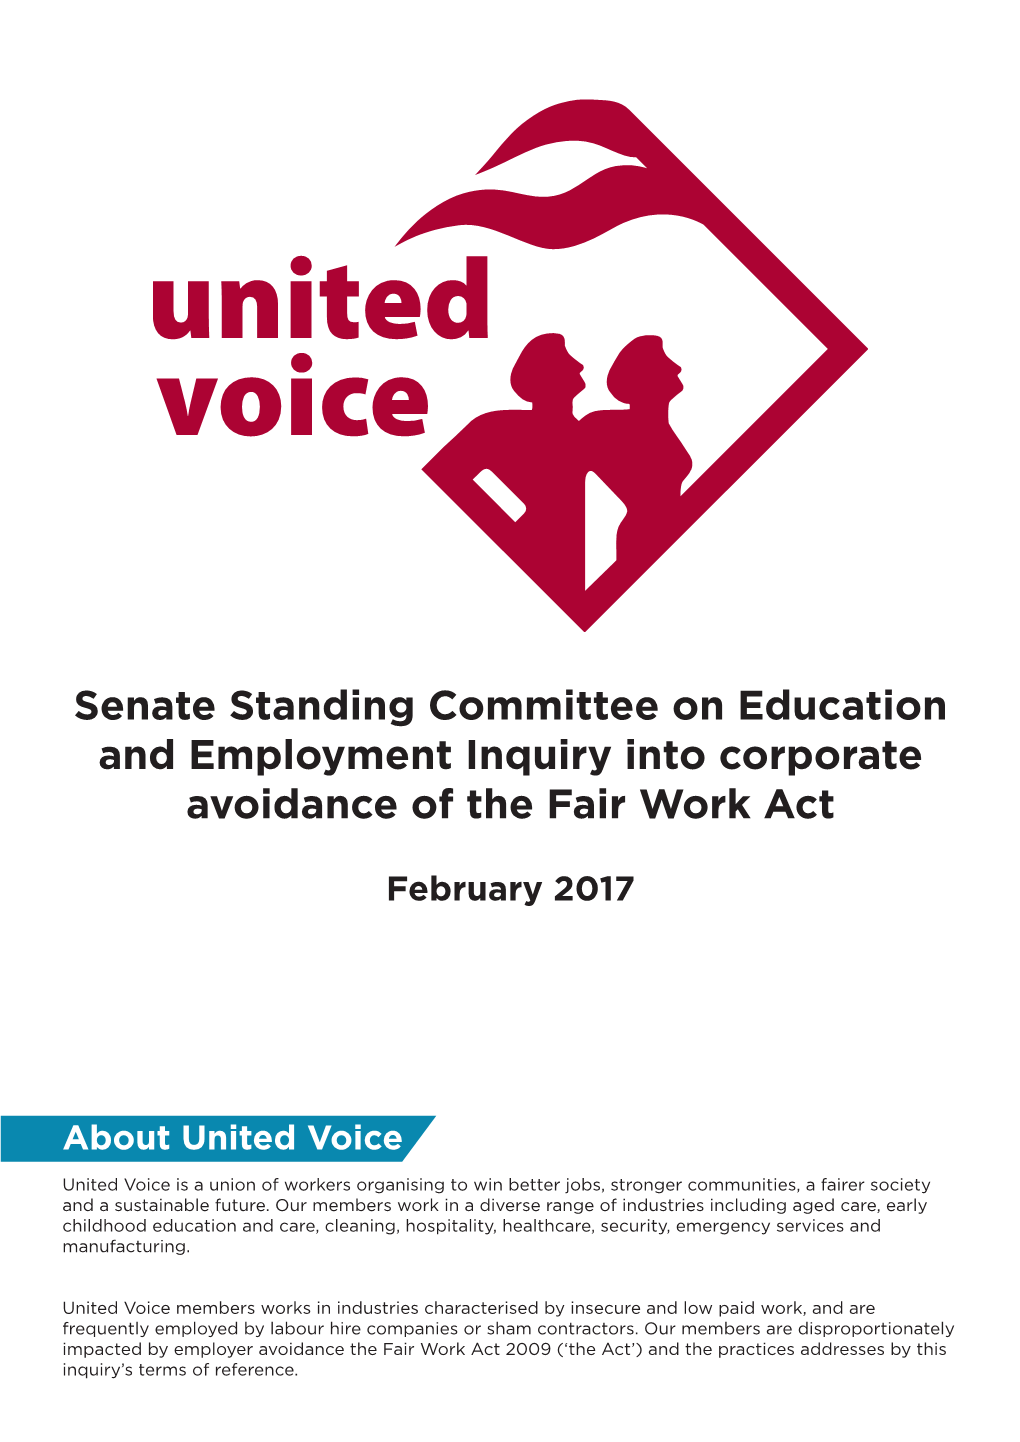 Senate Standing Committee on Education and Employment Inquiry Into Corporate Avoidance of the Fair Work Act